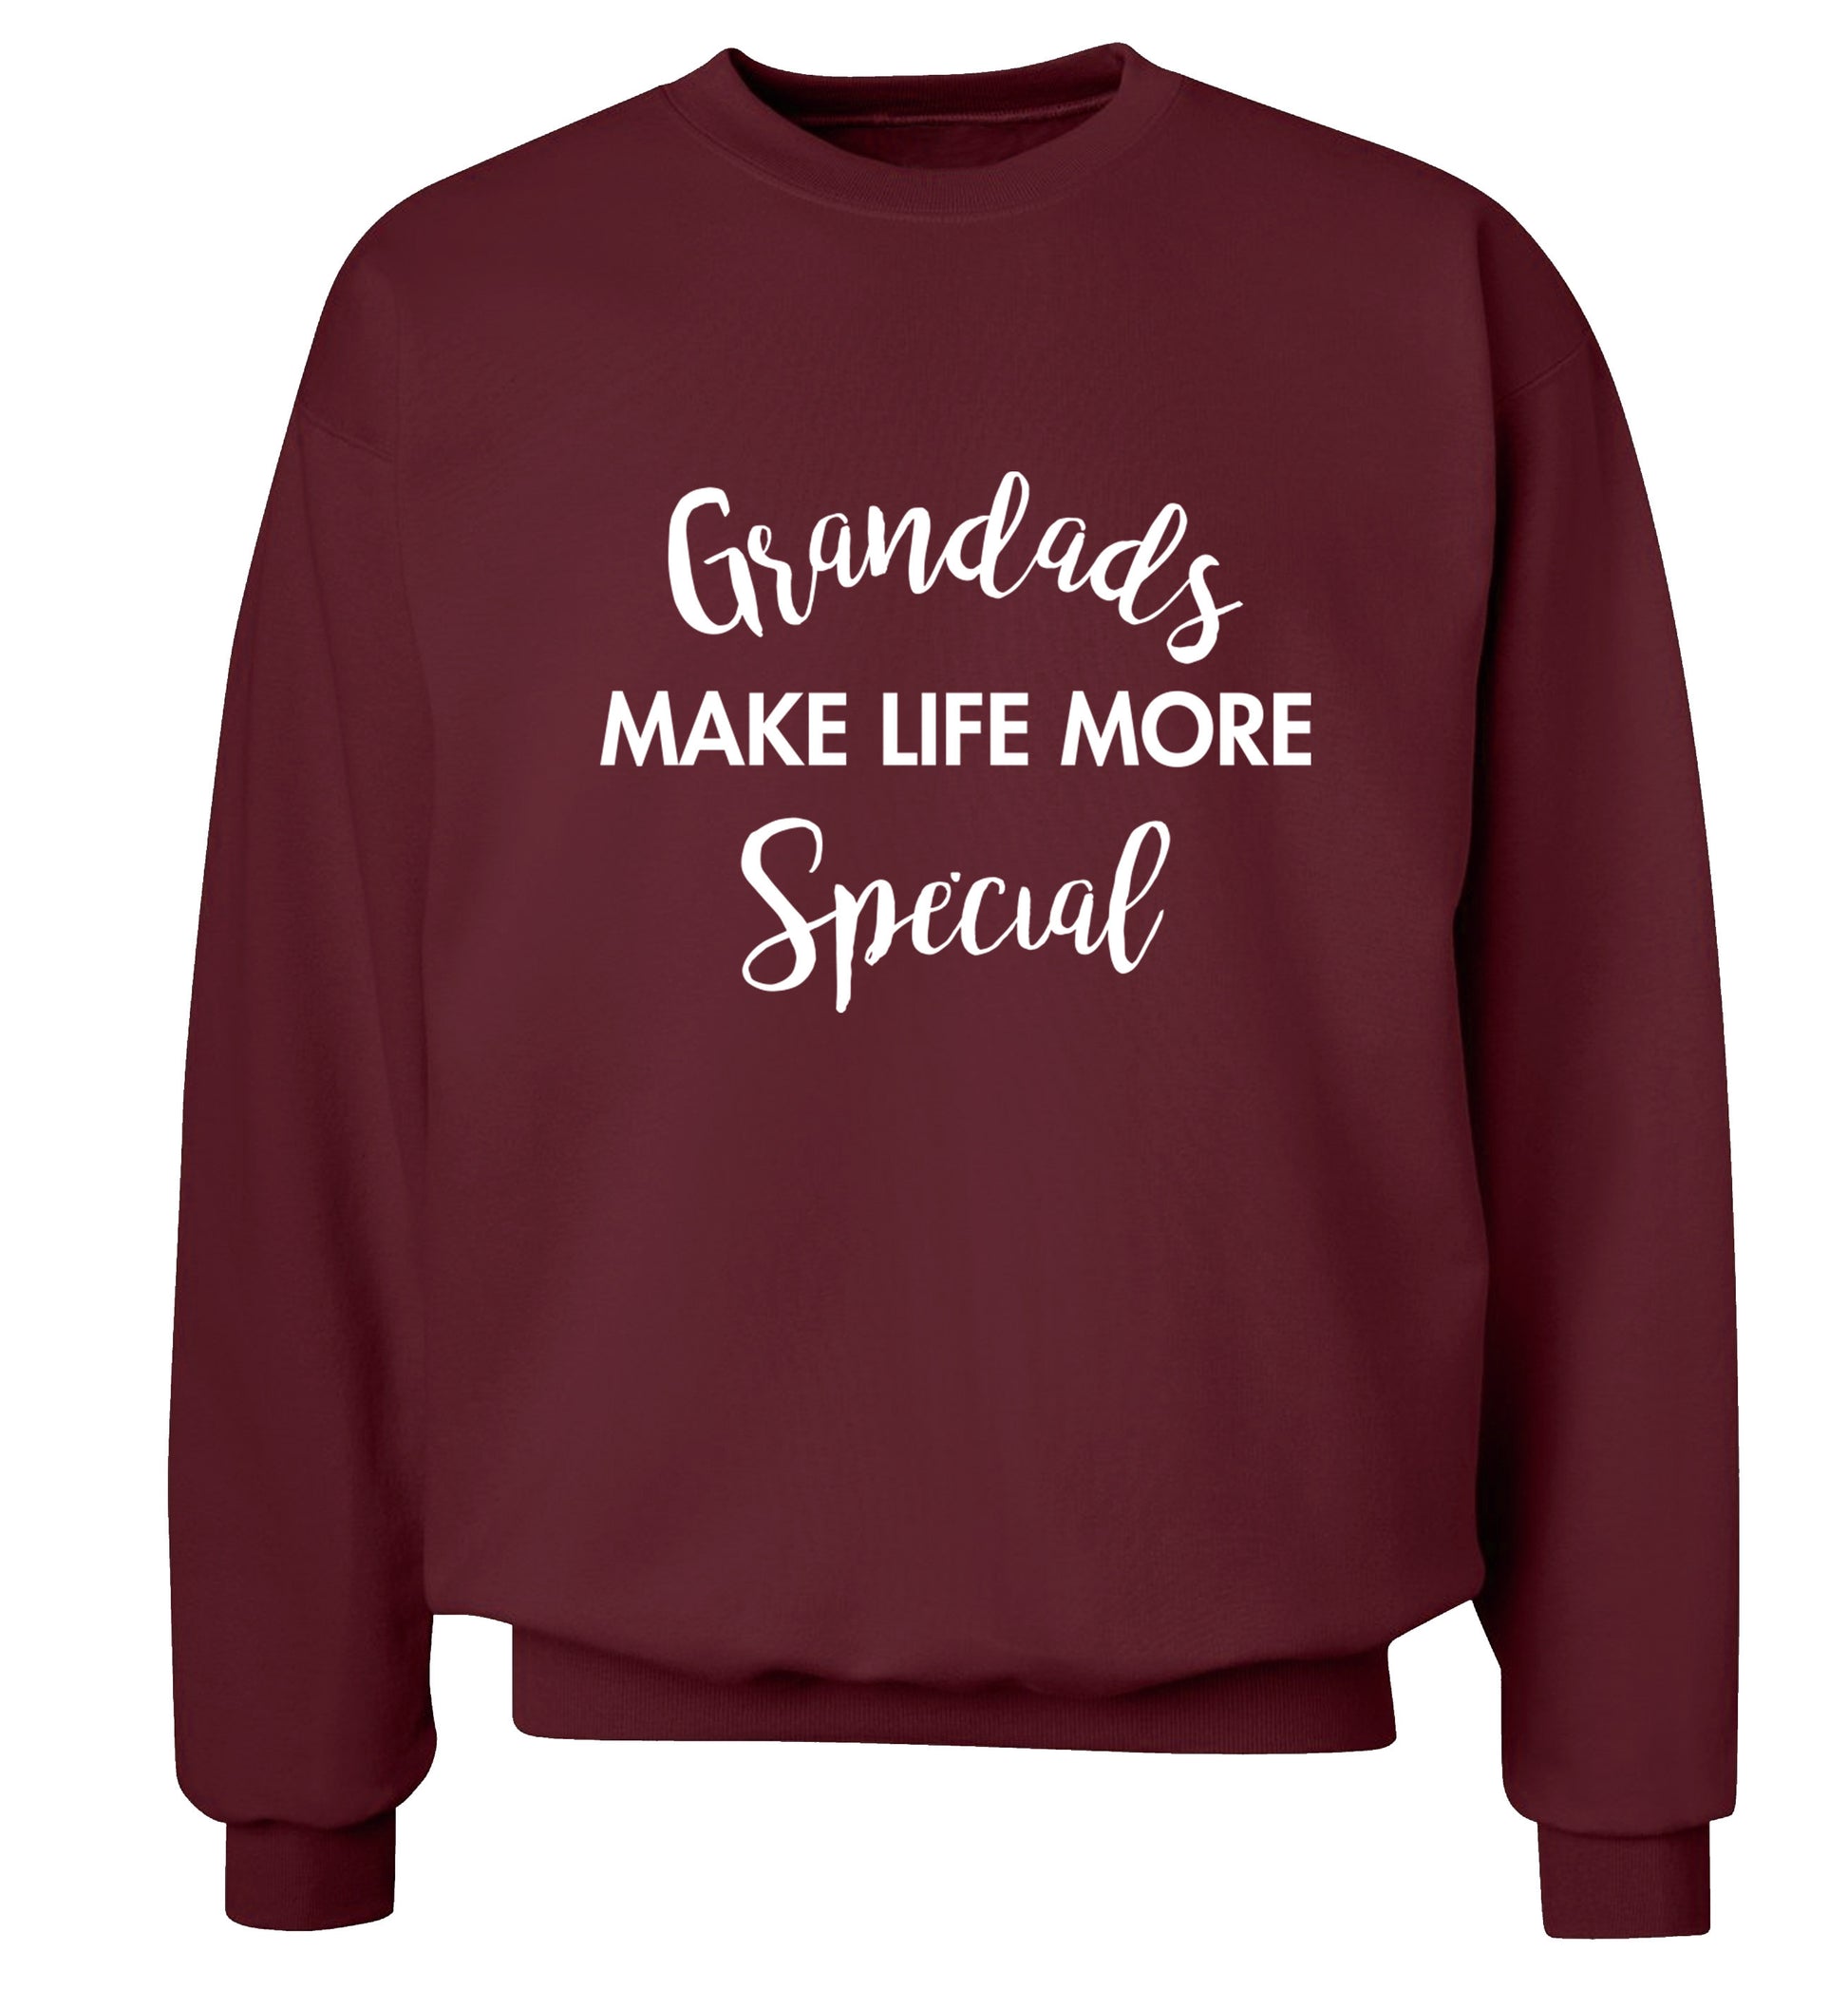 Grandads make life more special Adult's unisex maroon Sweater 2XL